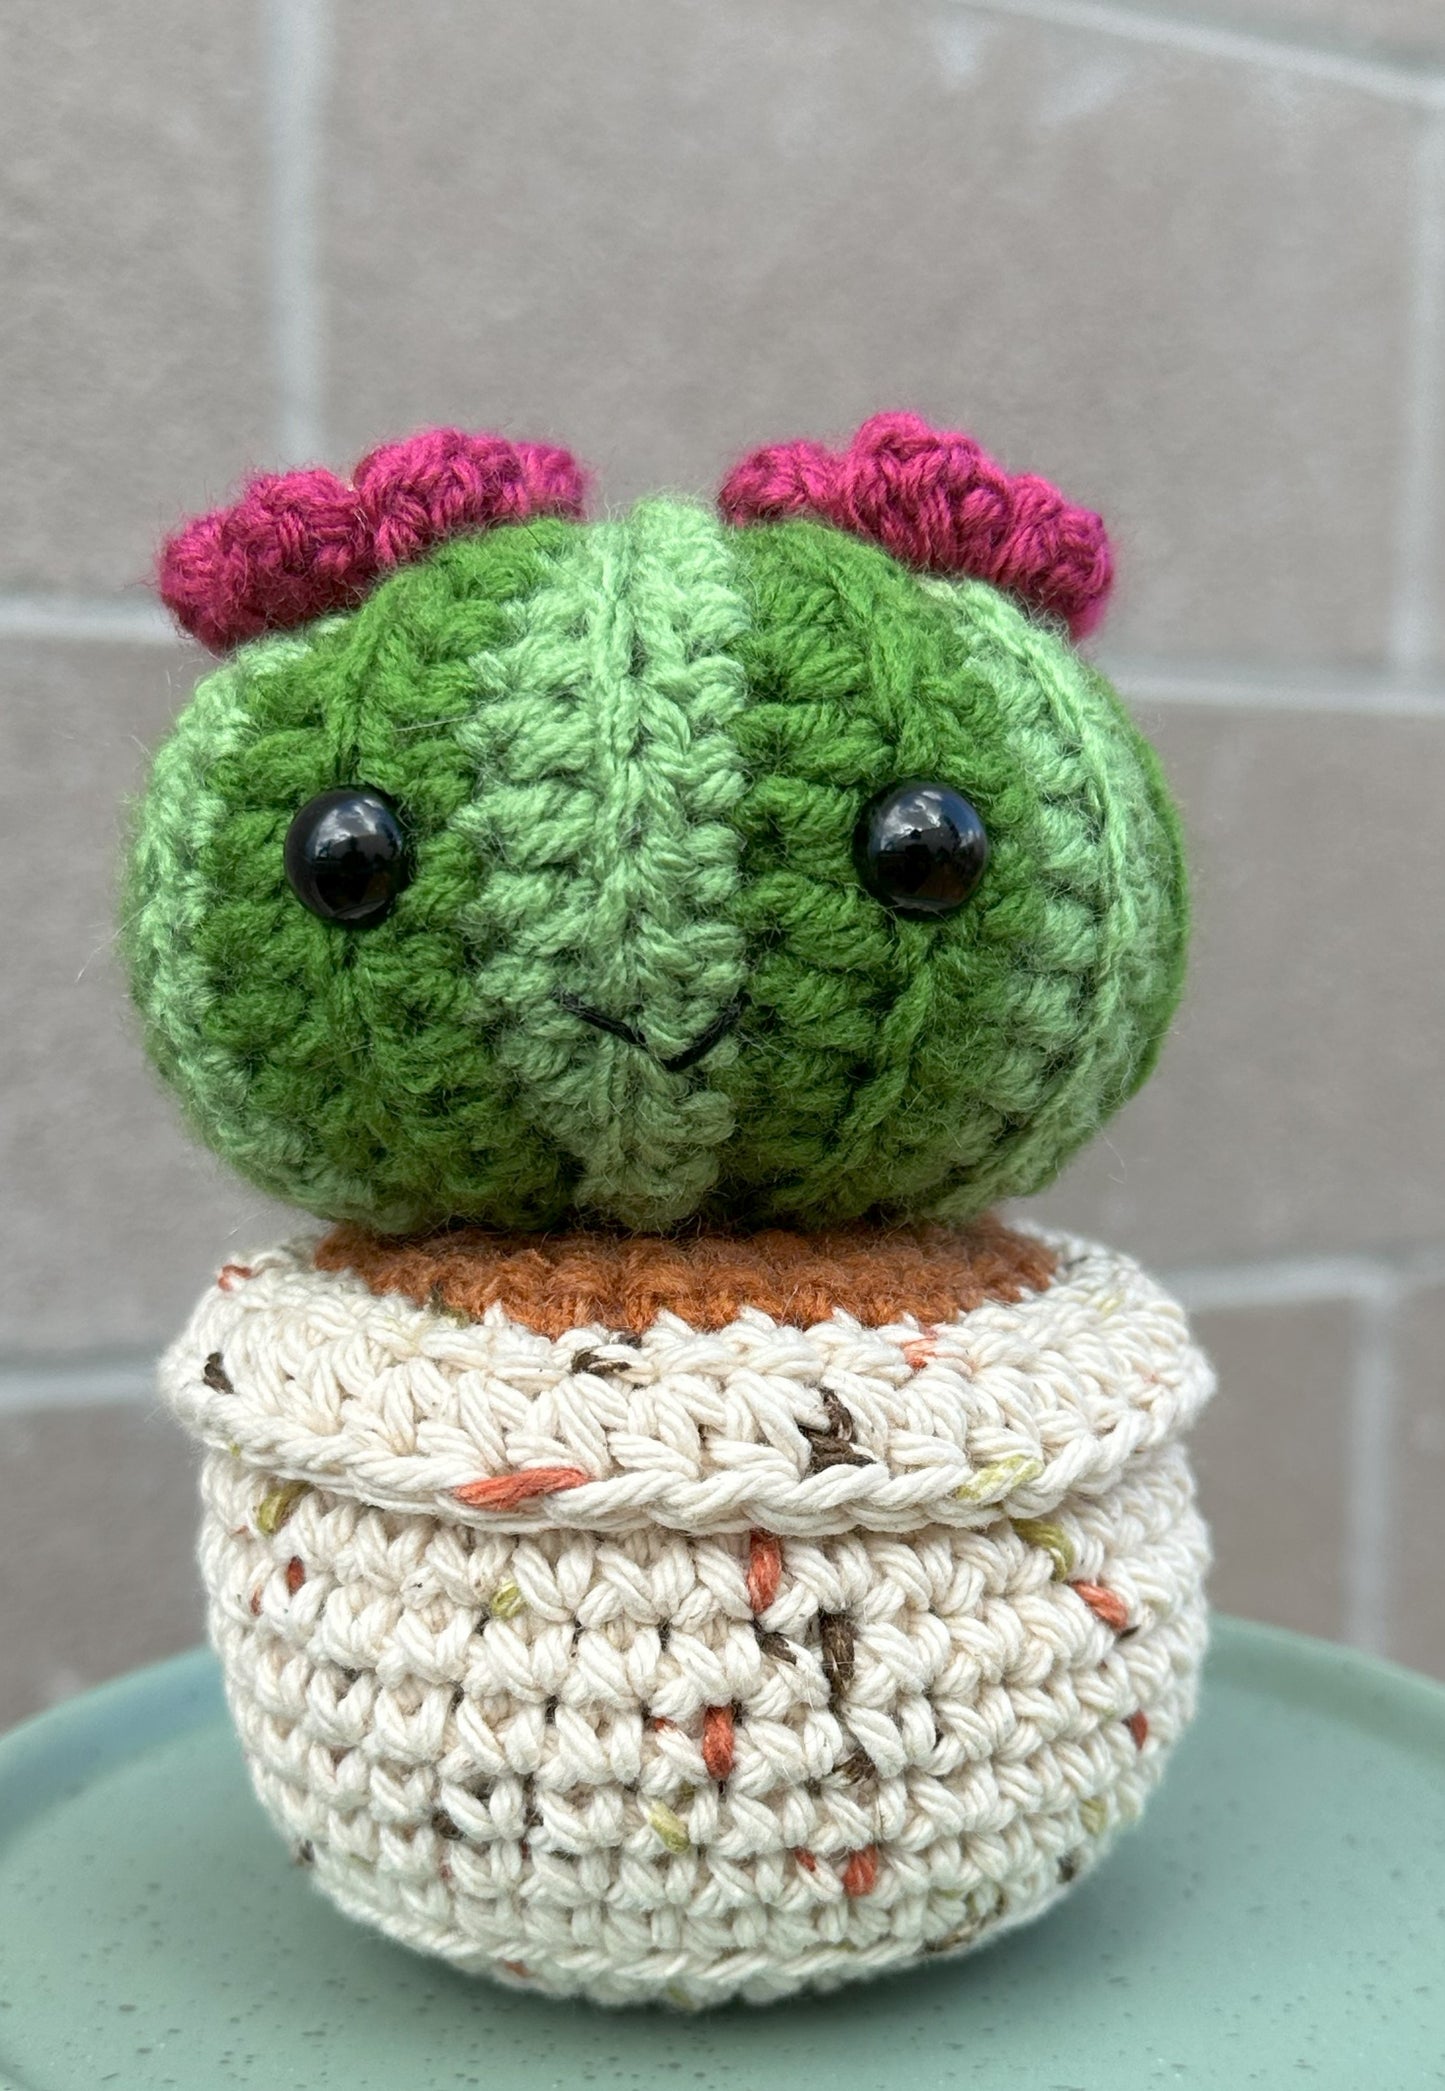 Hand Crochet Grassy Green Budding Barrel Cactus with Orchid Flower in Sandy Pot